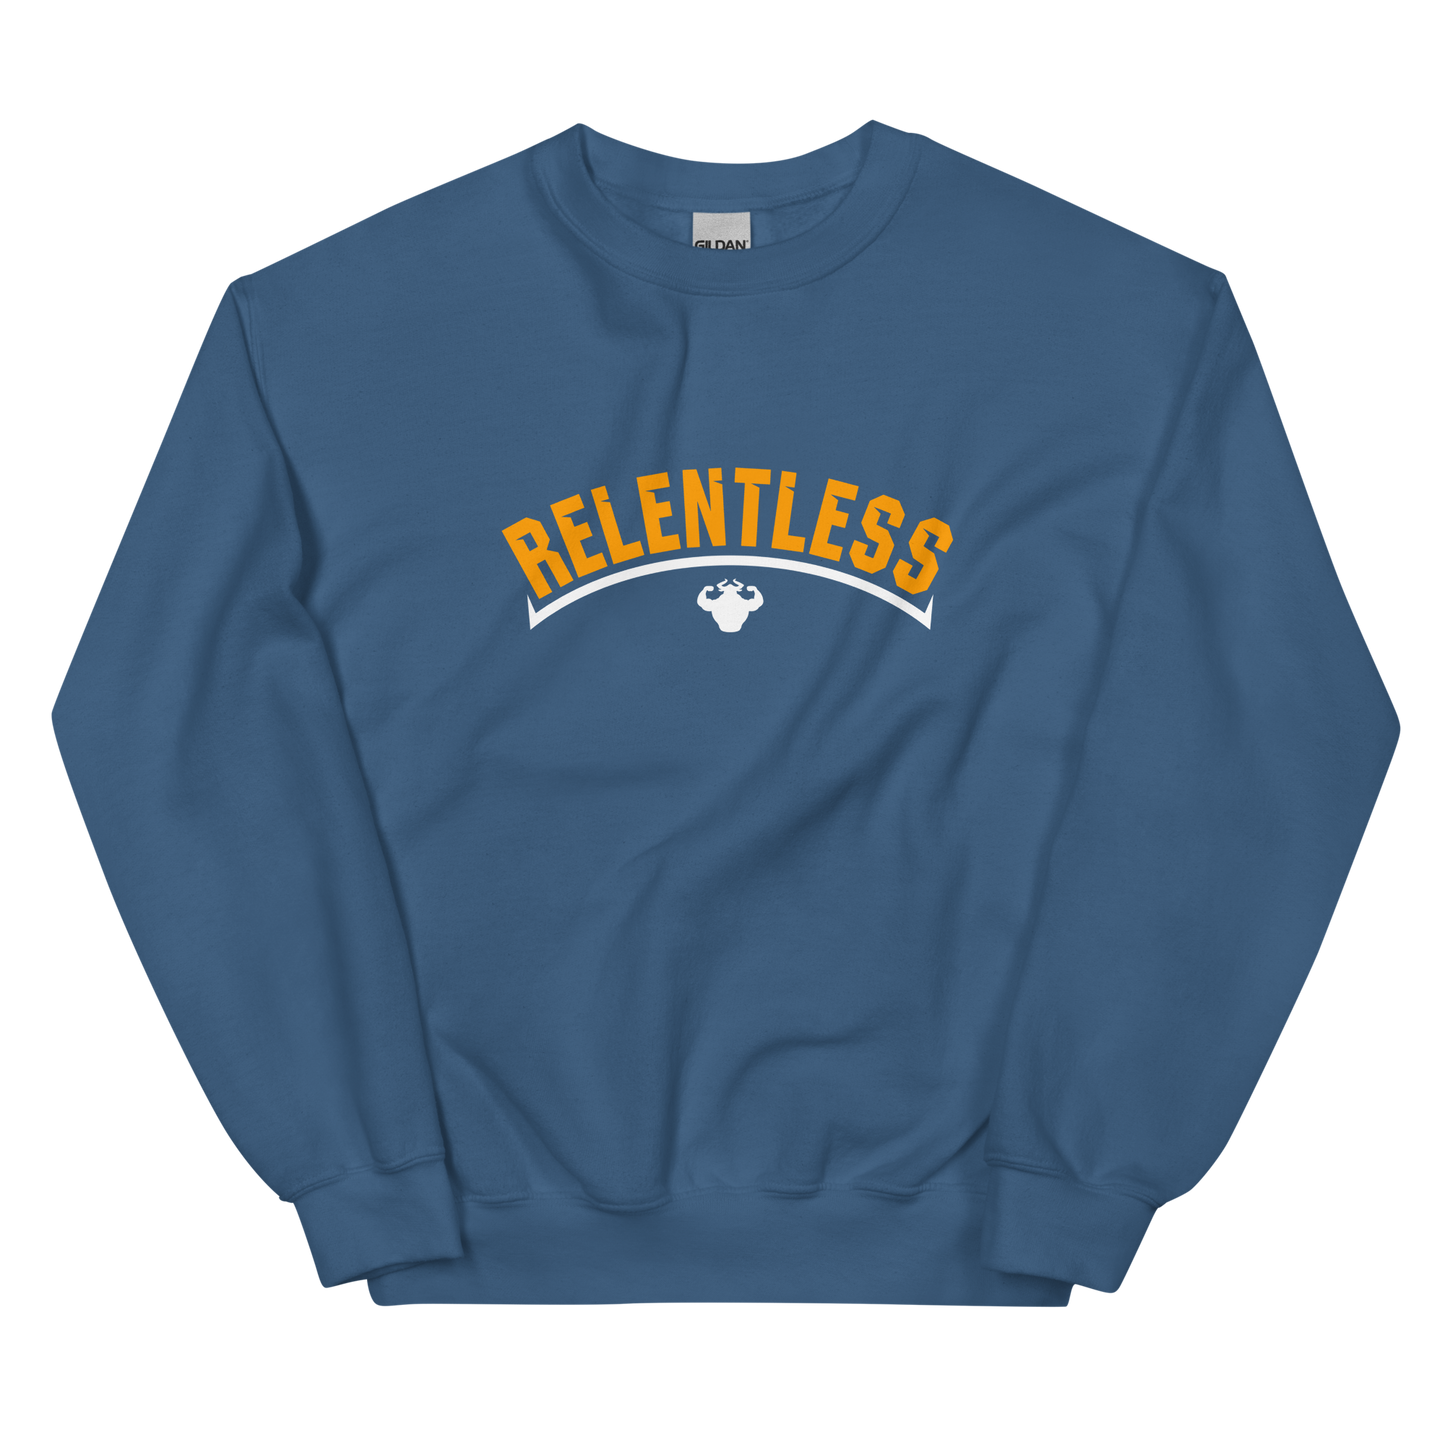 Relentless Sweatshirt  - Strong and Humble Apparel